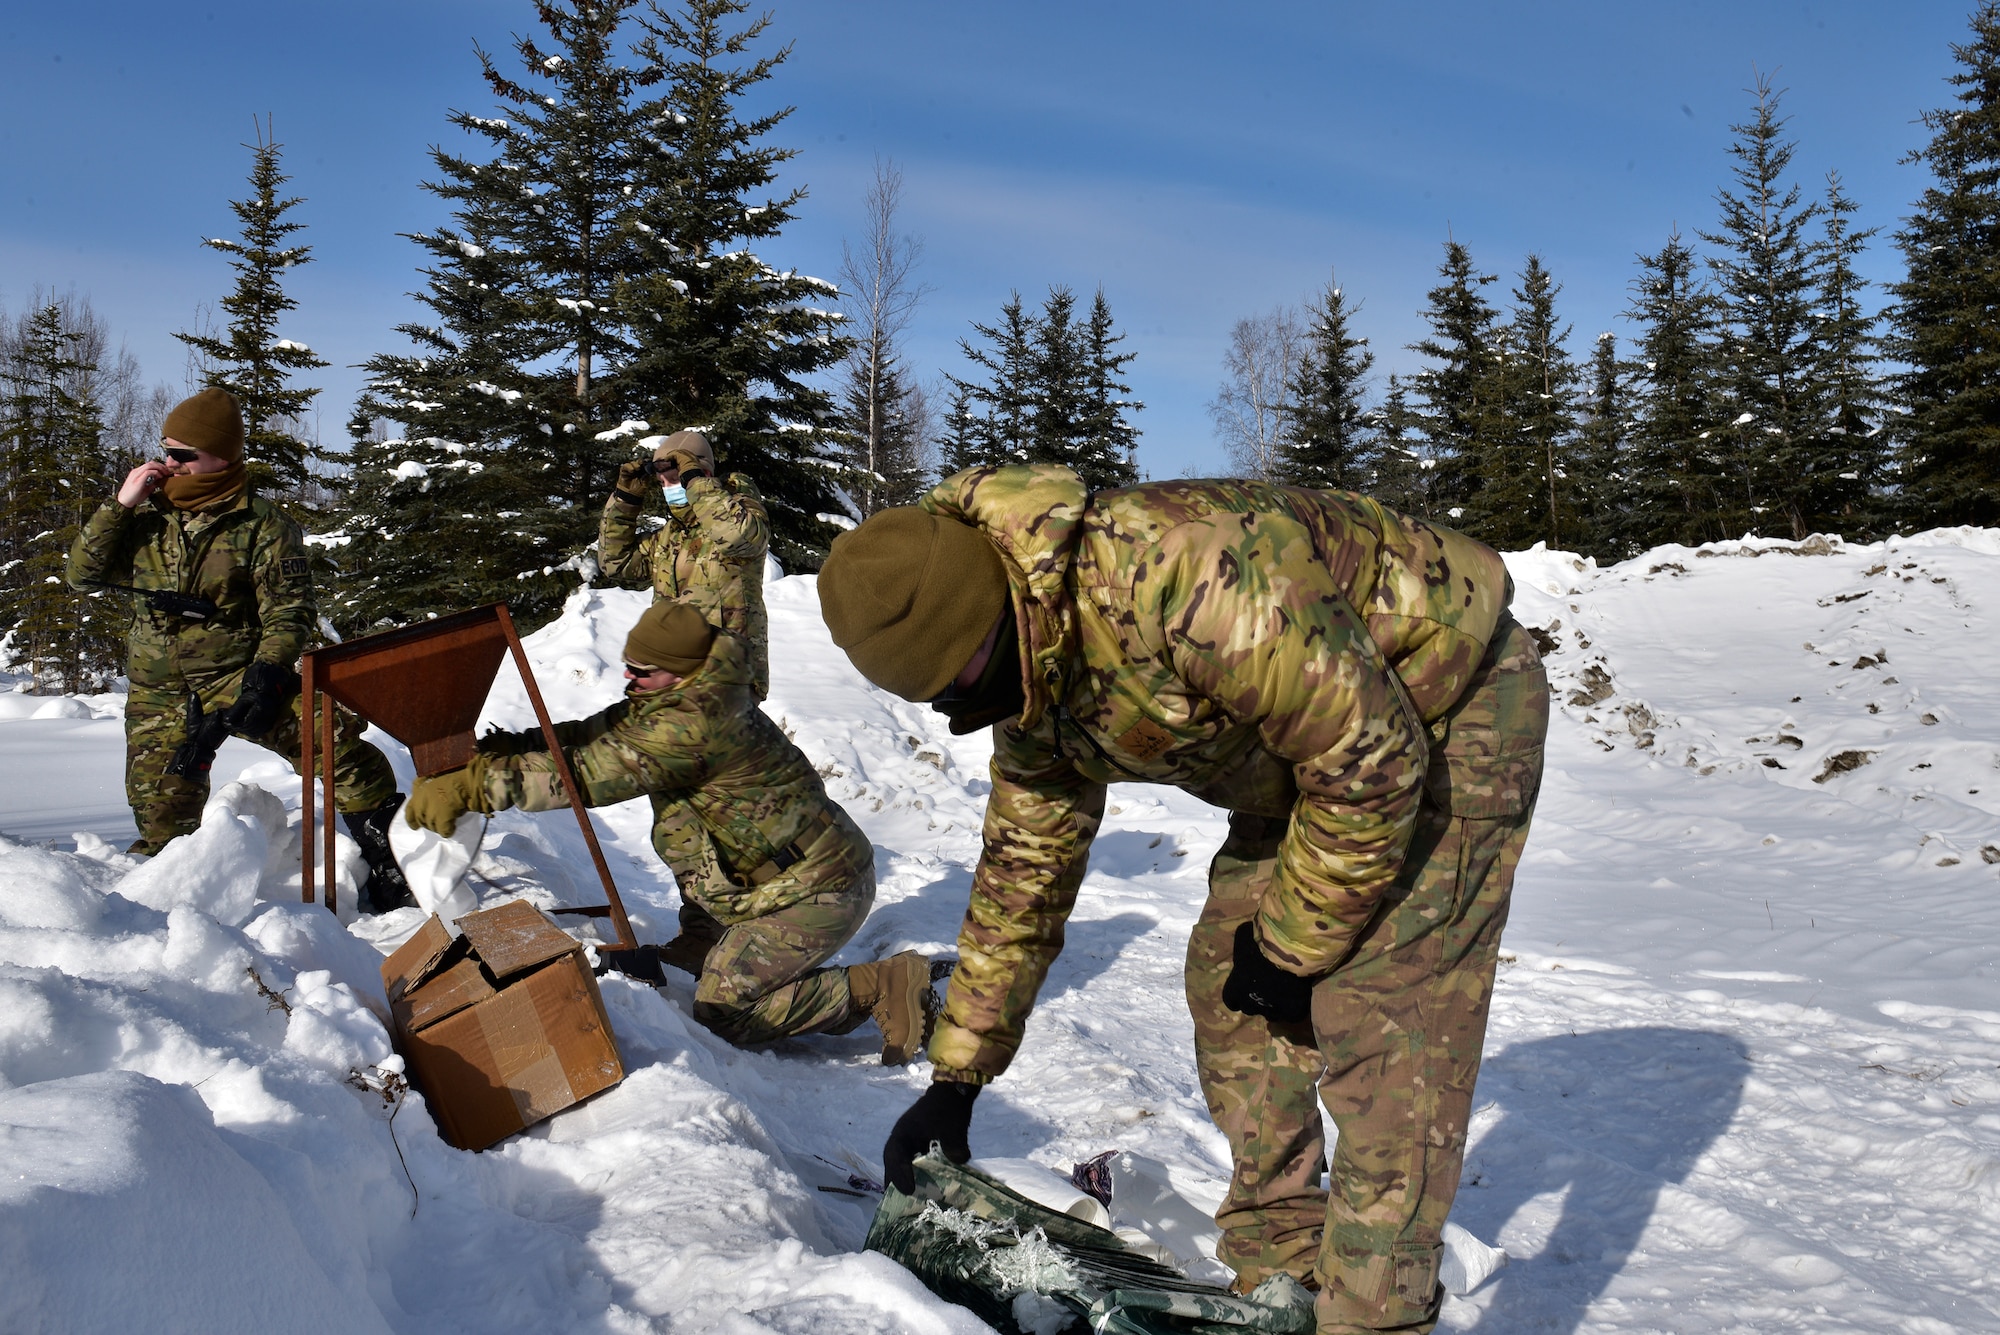 U.S. Air Force Airmen from the 354th Civil Engineer Squadron Explosive Ordnance Disposal (EOD) Flight prepare bags for the snow mitigation experiment on March 18, 2021, at Eielson Air Force Base, Alaska. The experiment tested the use of snow to help mitigate explosive effects. Because of Alaska’s arctic environment, the usual method of using water to reduce blast wave peak pressures is often impractical. Therefore, Icemen Spark and EOD sought to use a more readily available material: snow. (U.S. Air Force photo/Senior Airman Danielle Sukhlall)